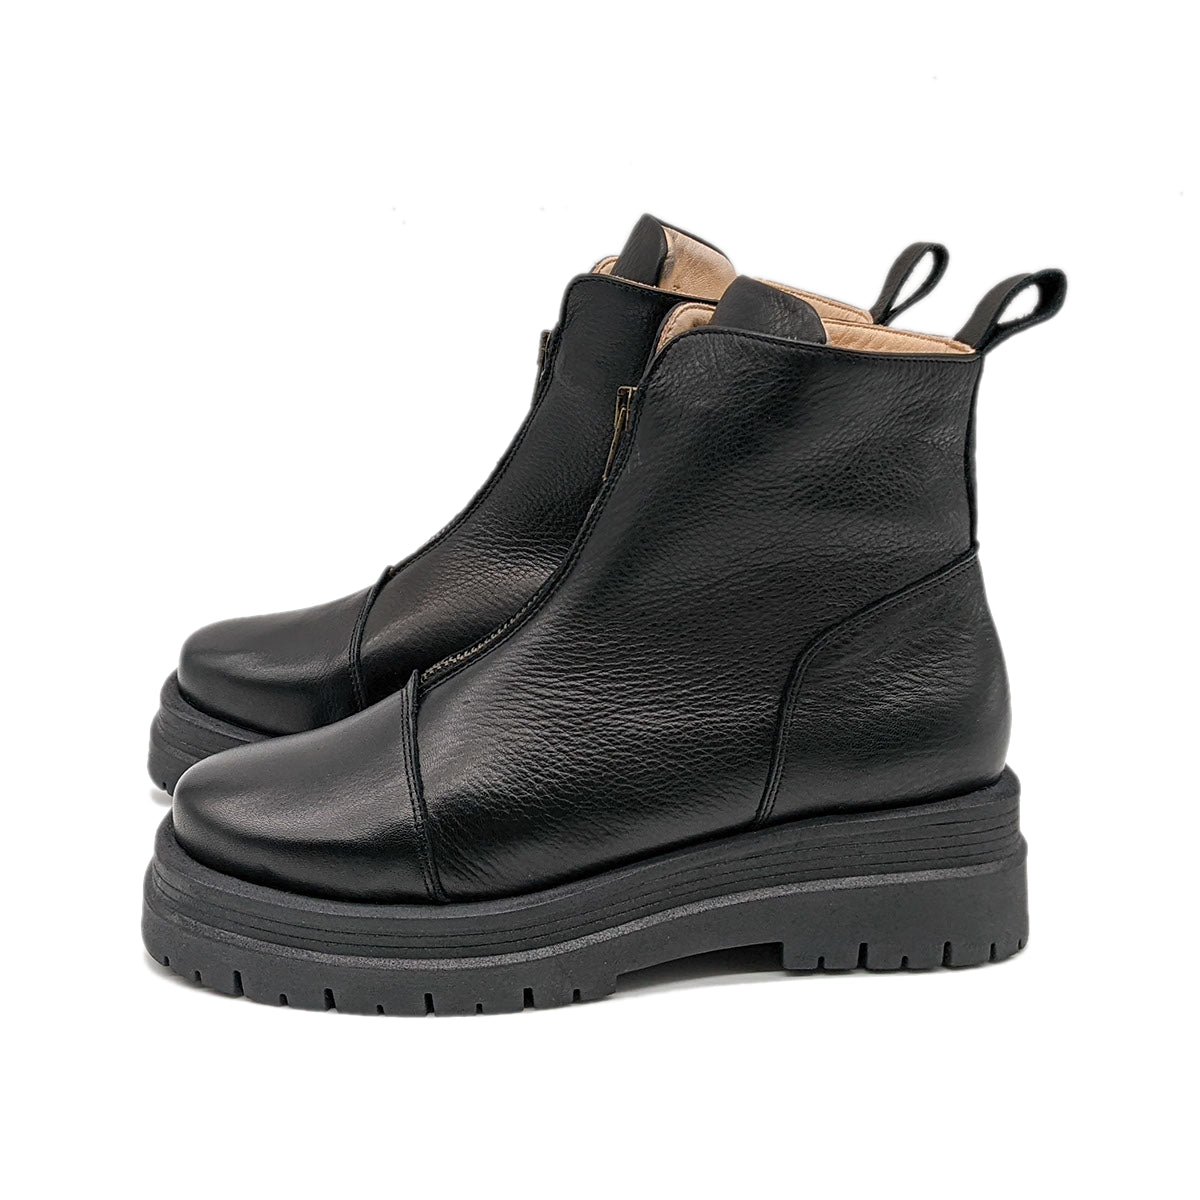 Serval zipper boots made of organic leather